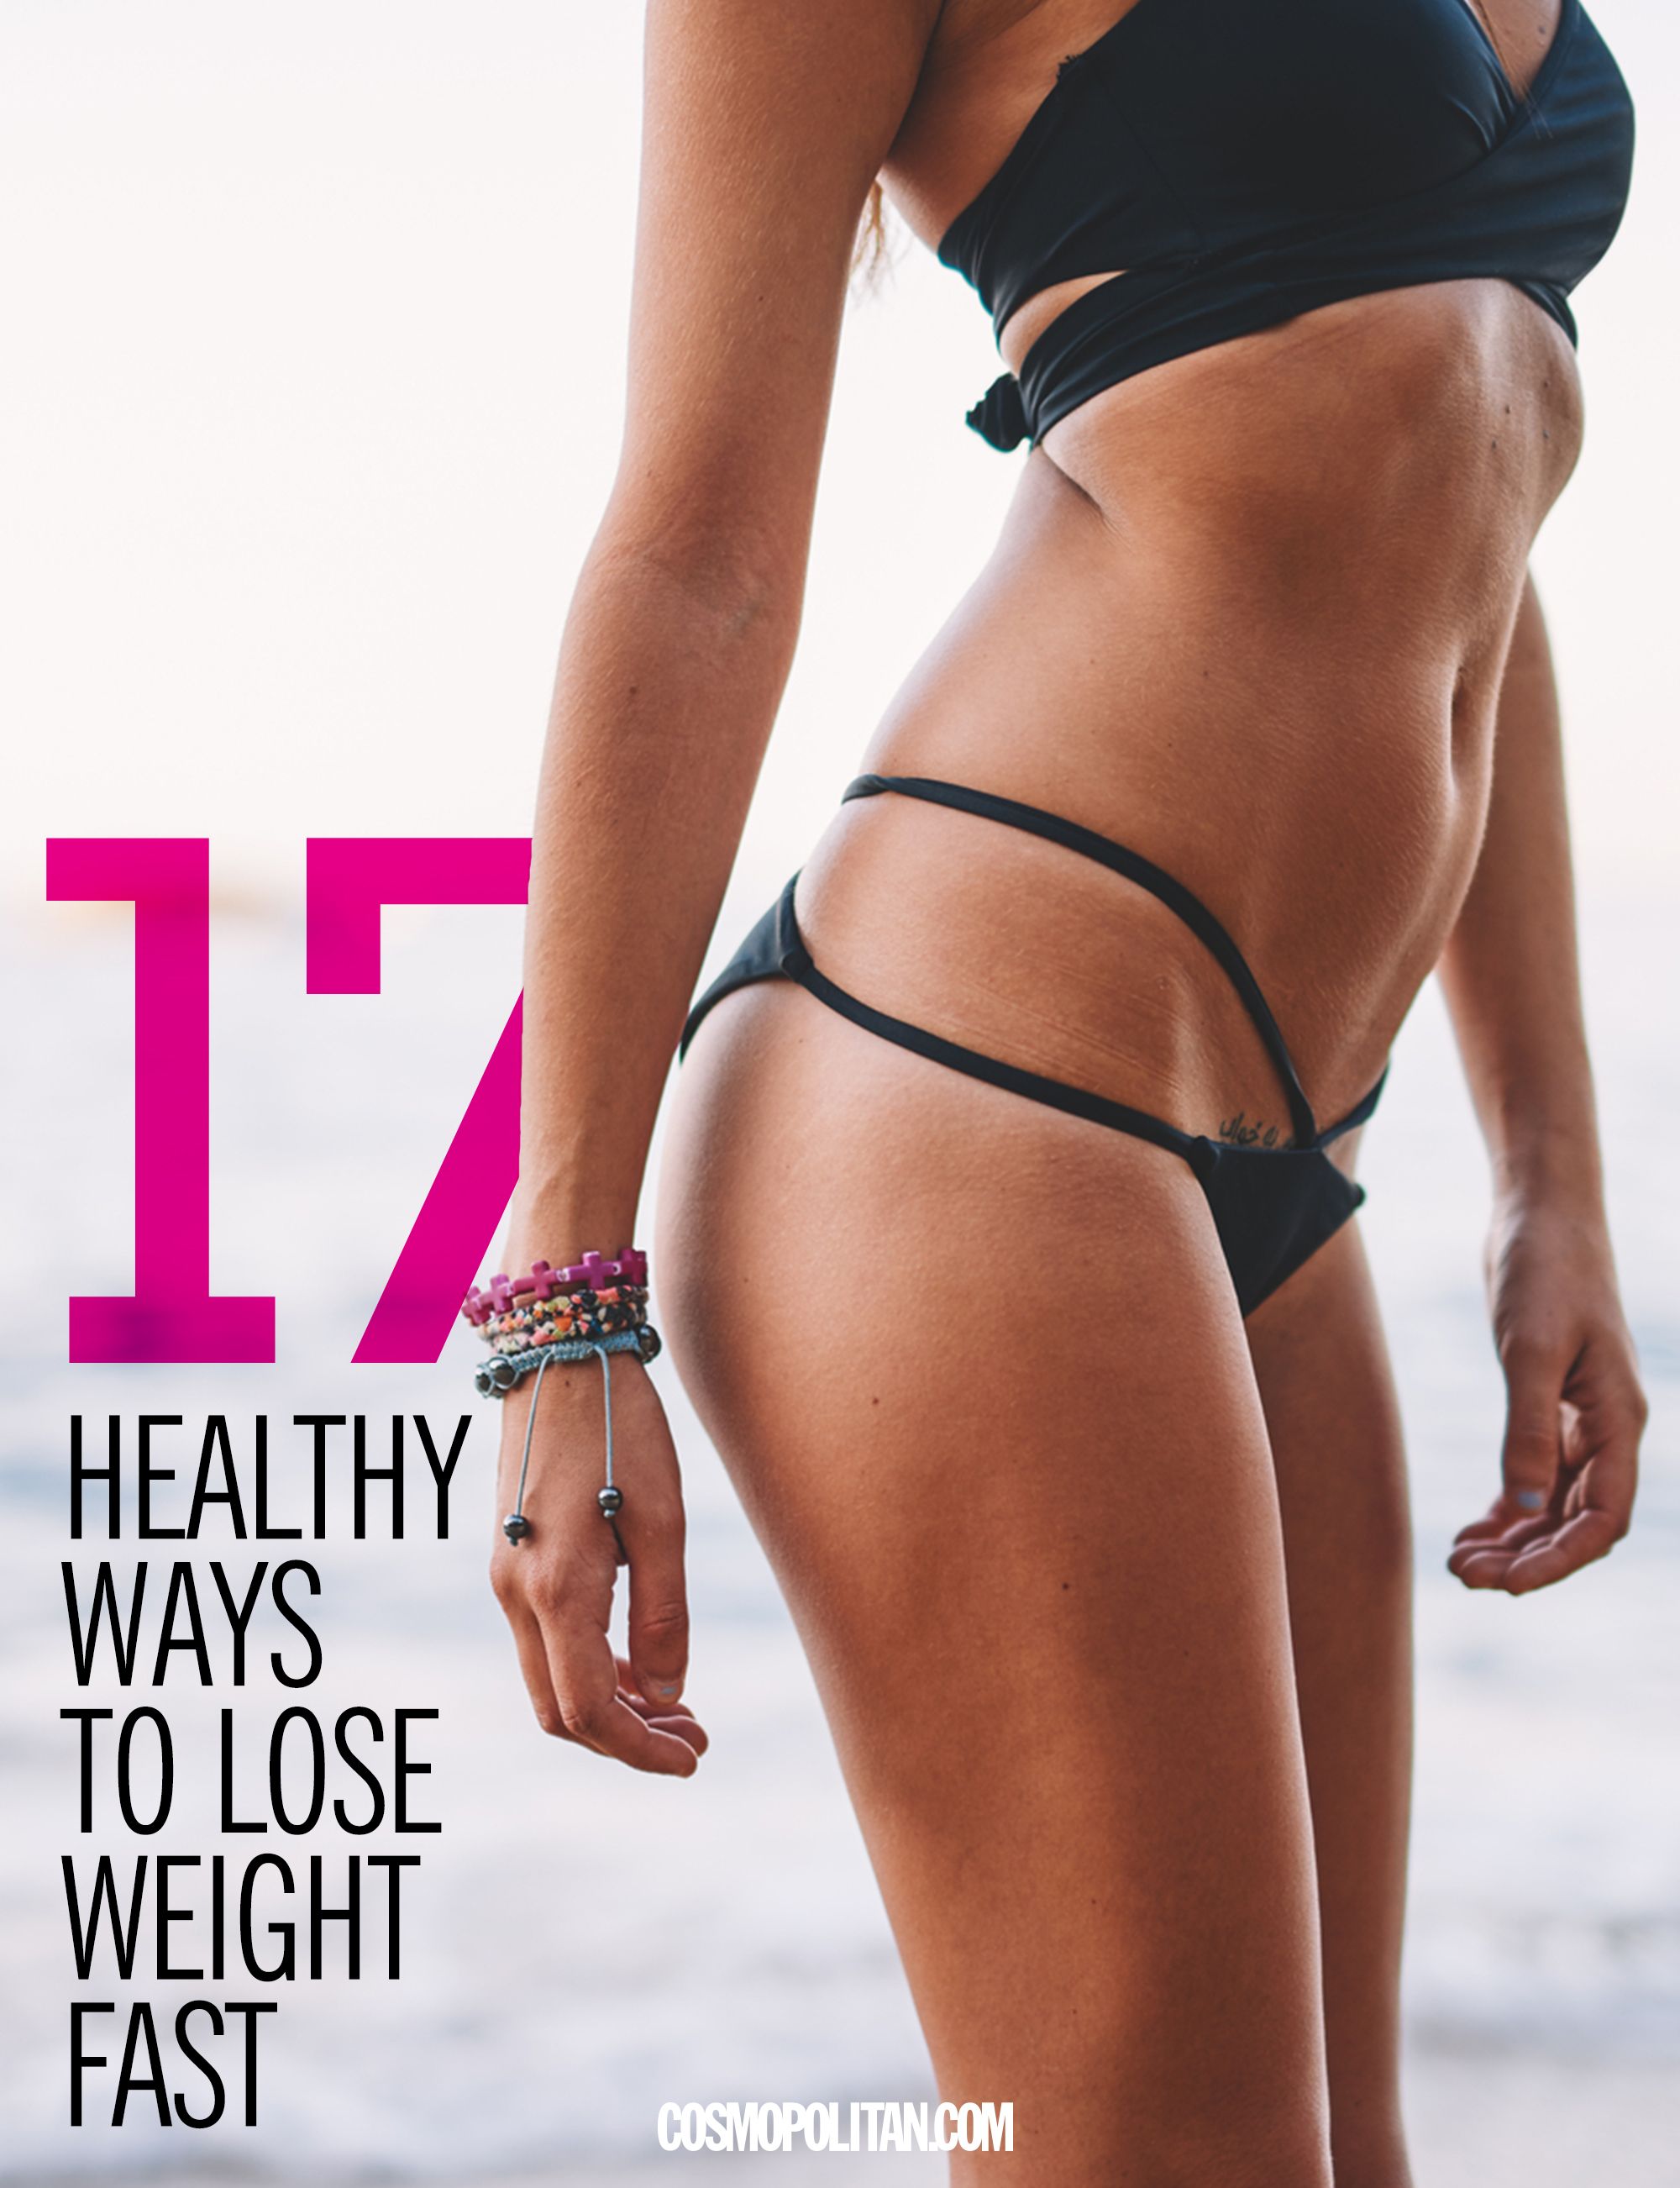 17 Healthy Ways to Lose Weight Fast